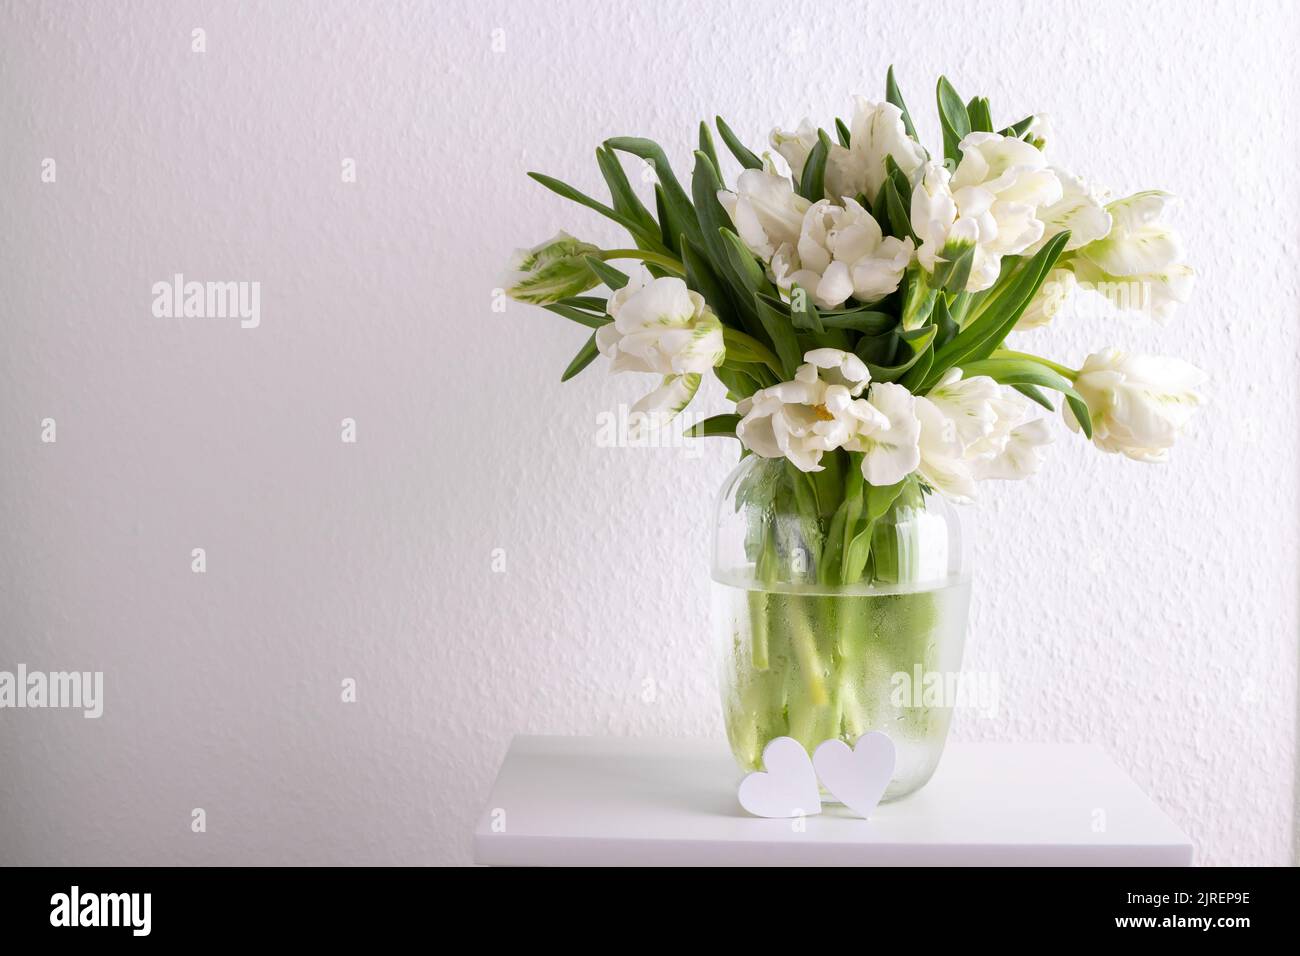 Bouquet of white tulips in a vase against white wall copy space Stock Photo